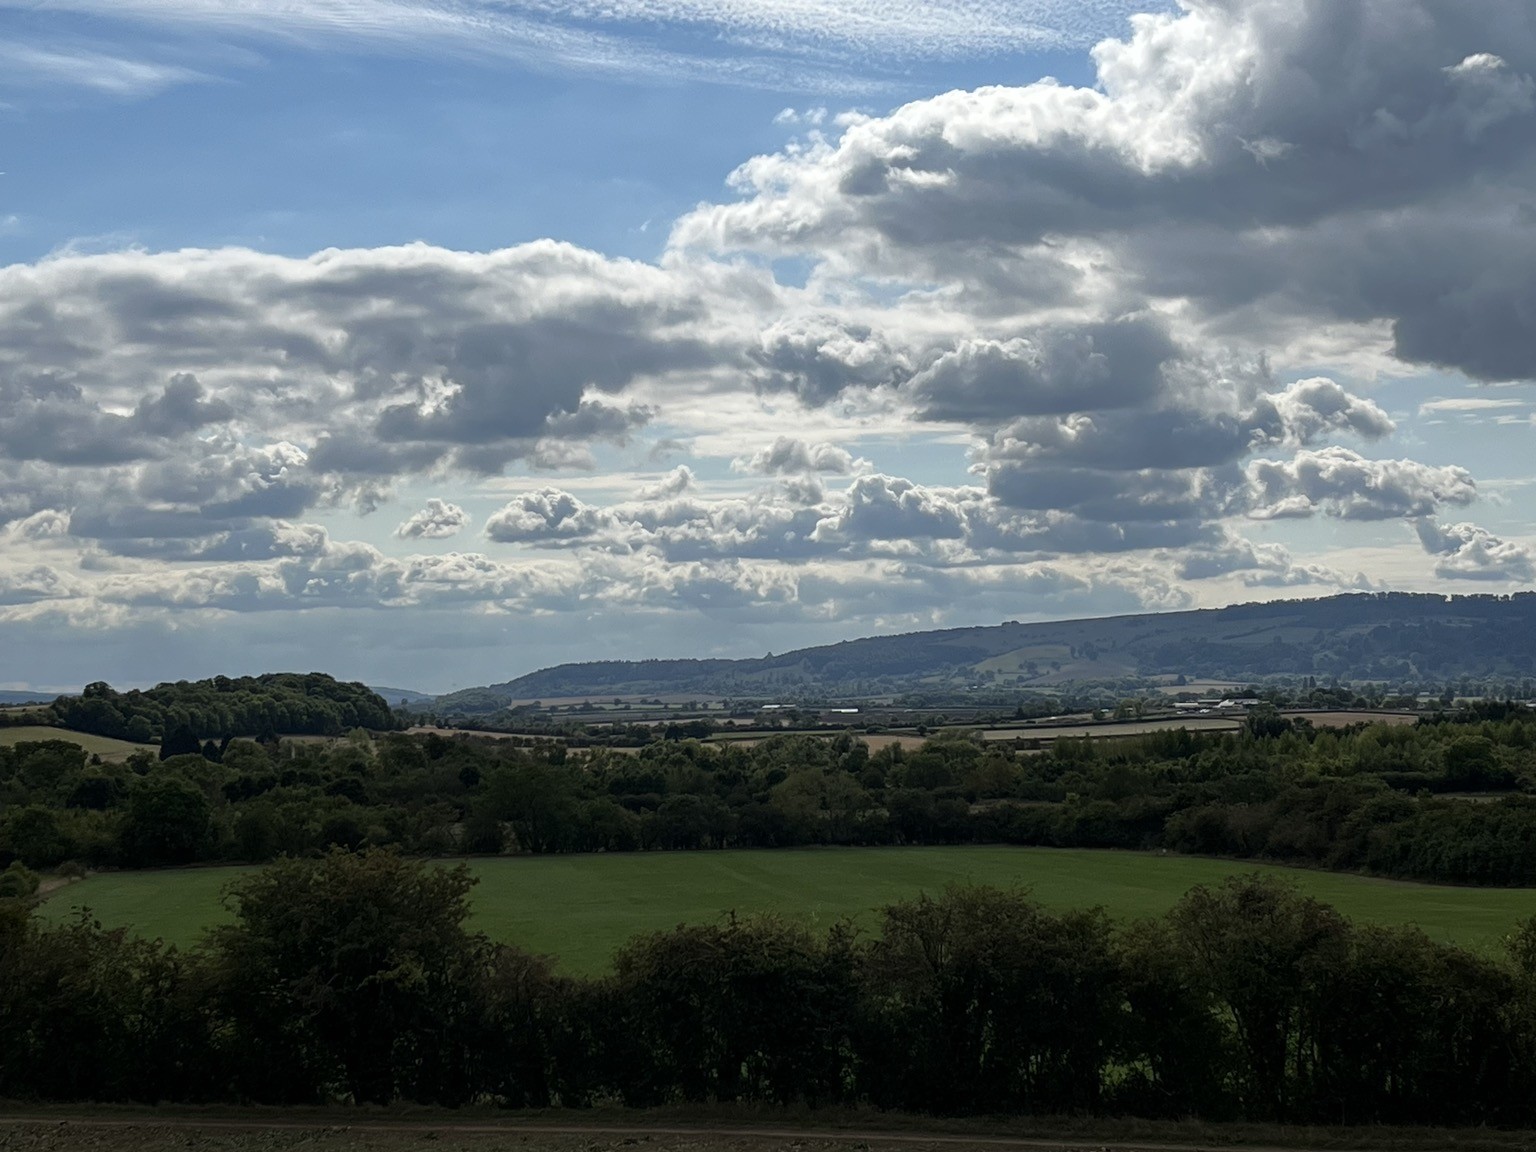 Clouds and sunlight play on the Cotswold Hills, seen from the Evesham Vale